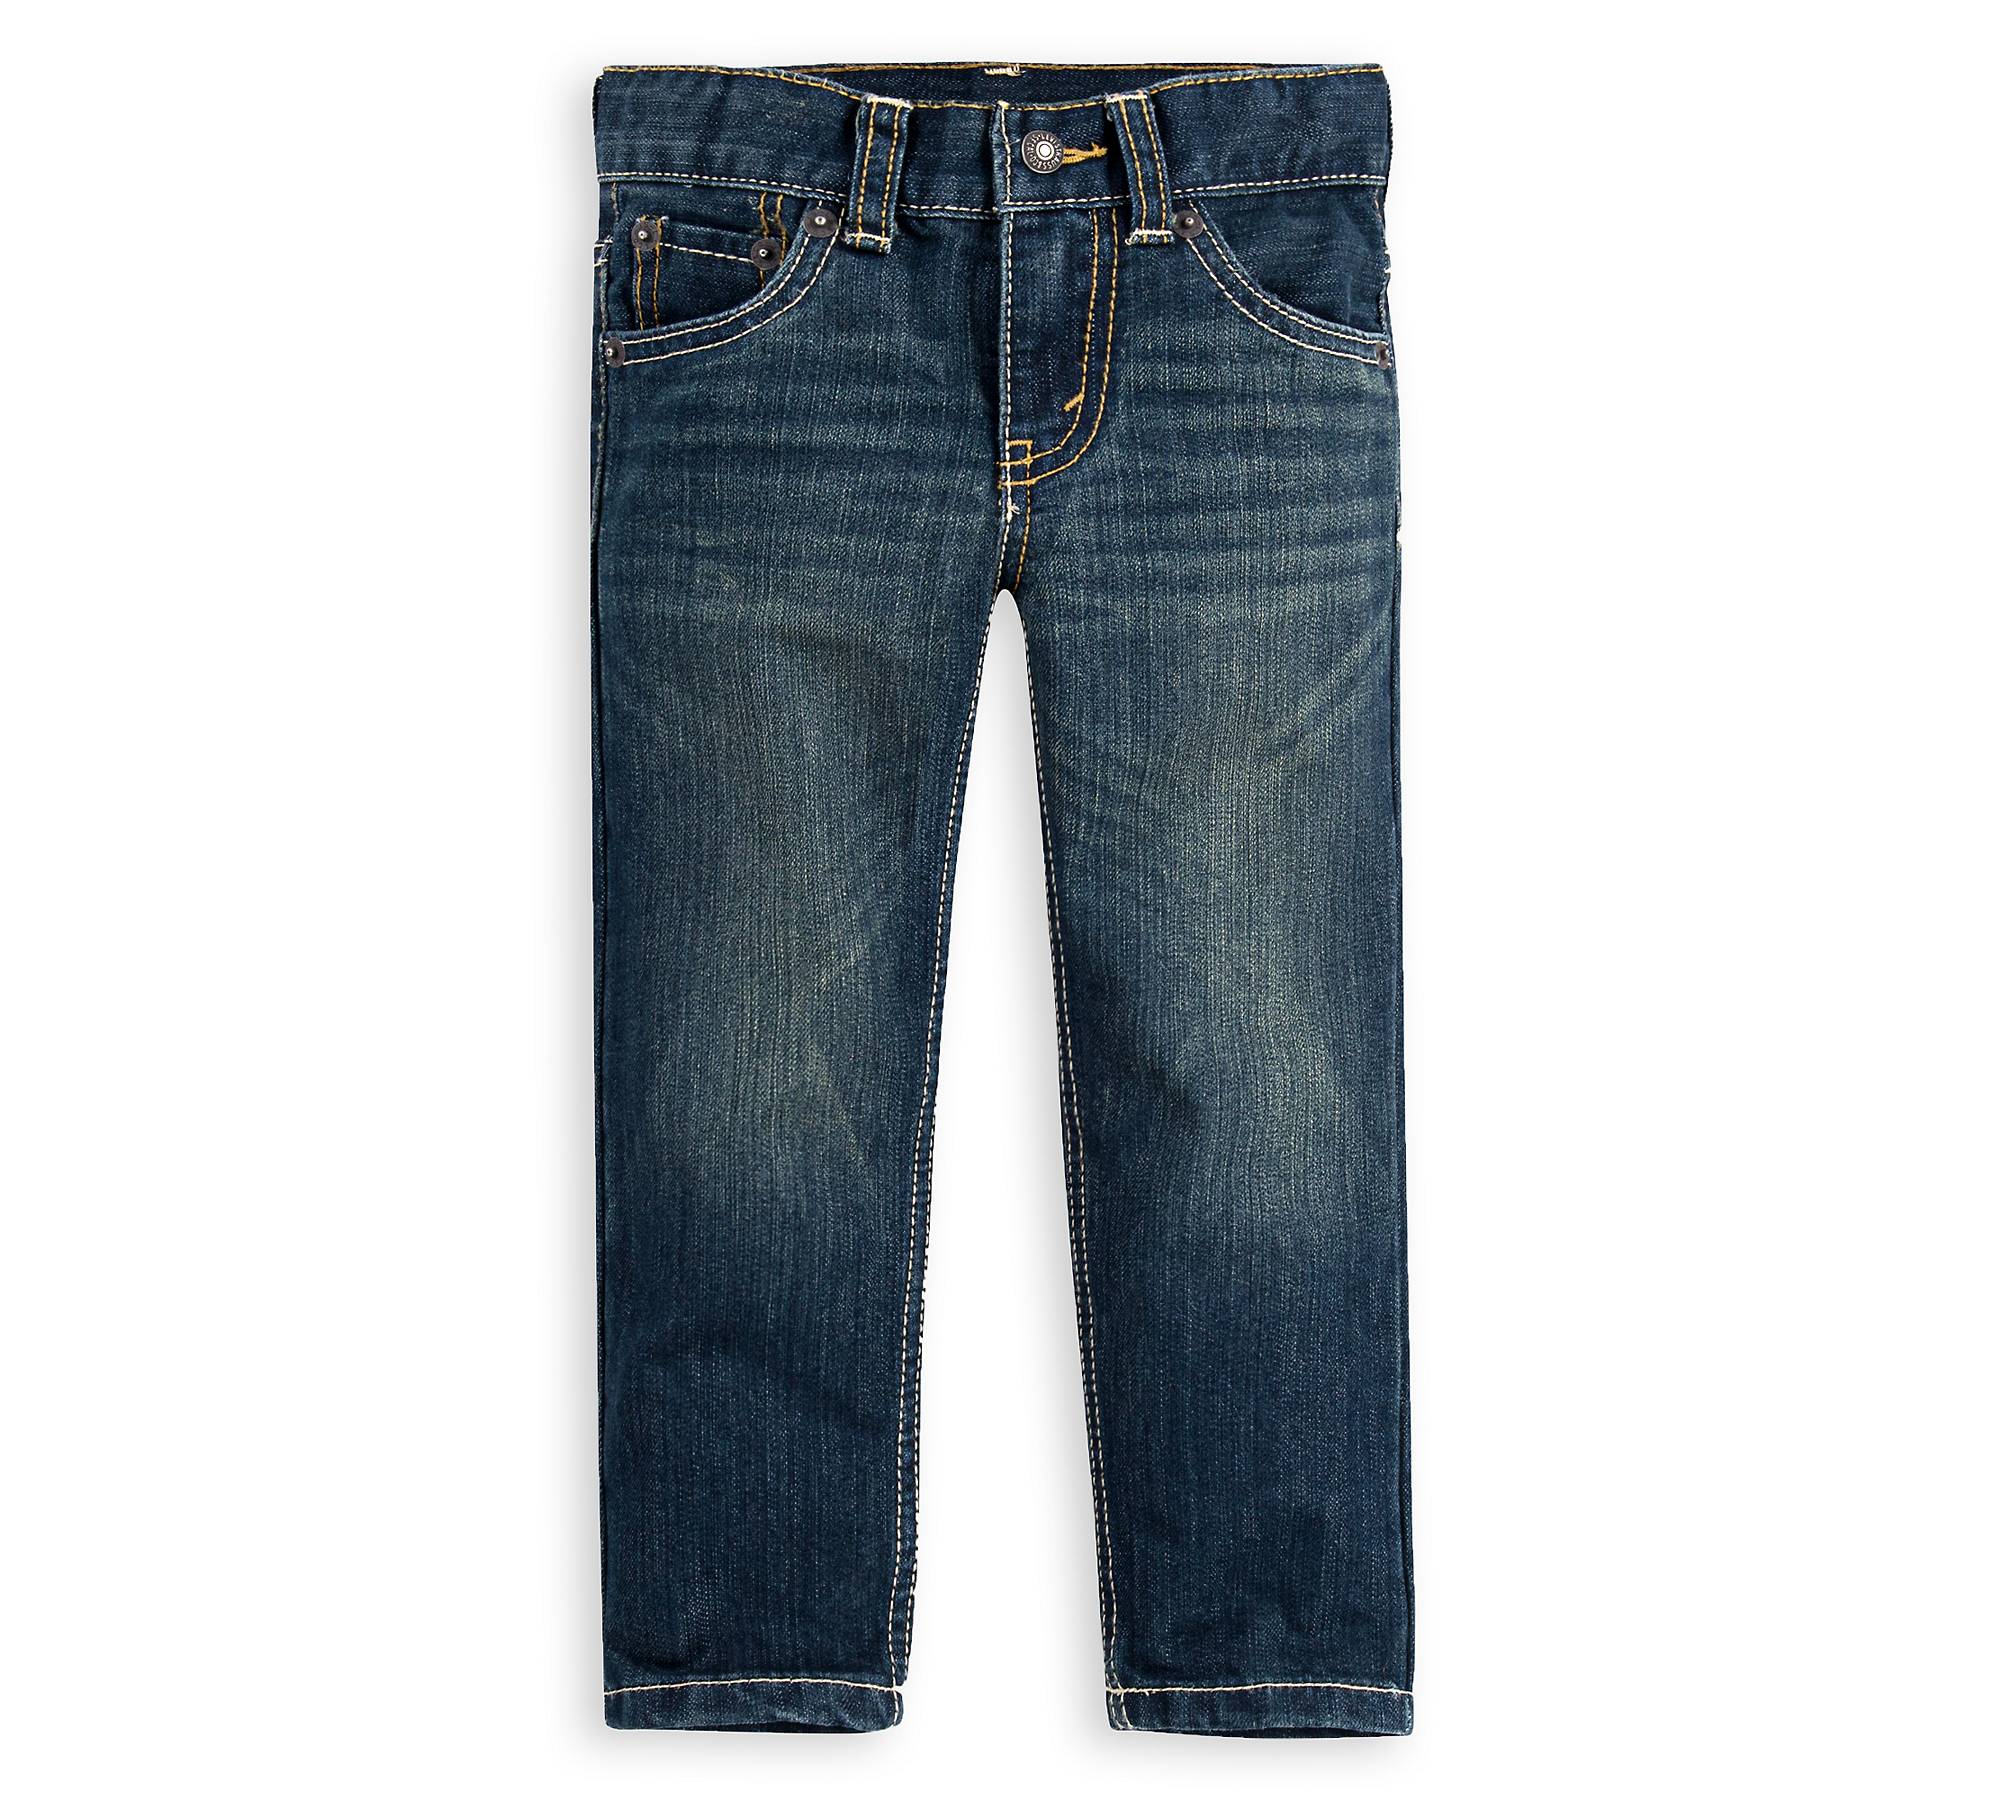 502™ Taper Fit Toddler Boys Jeans 2T-4T 1